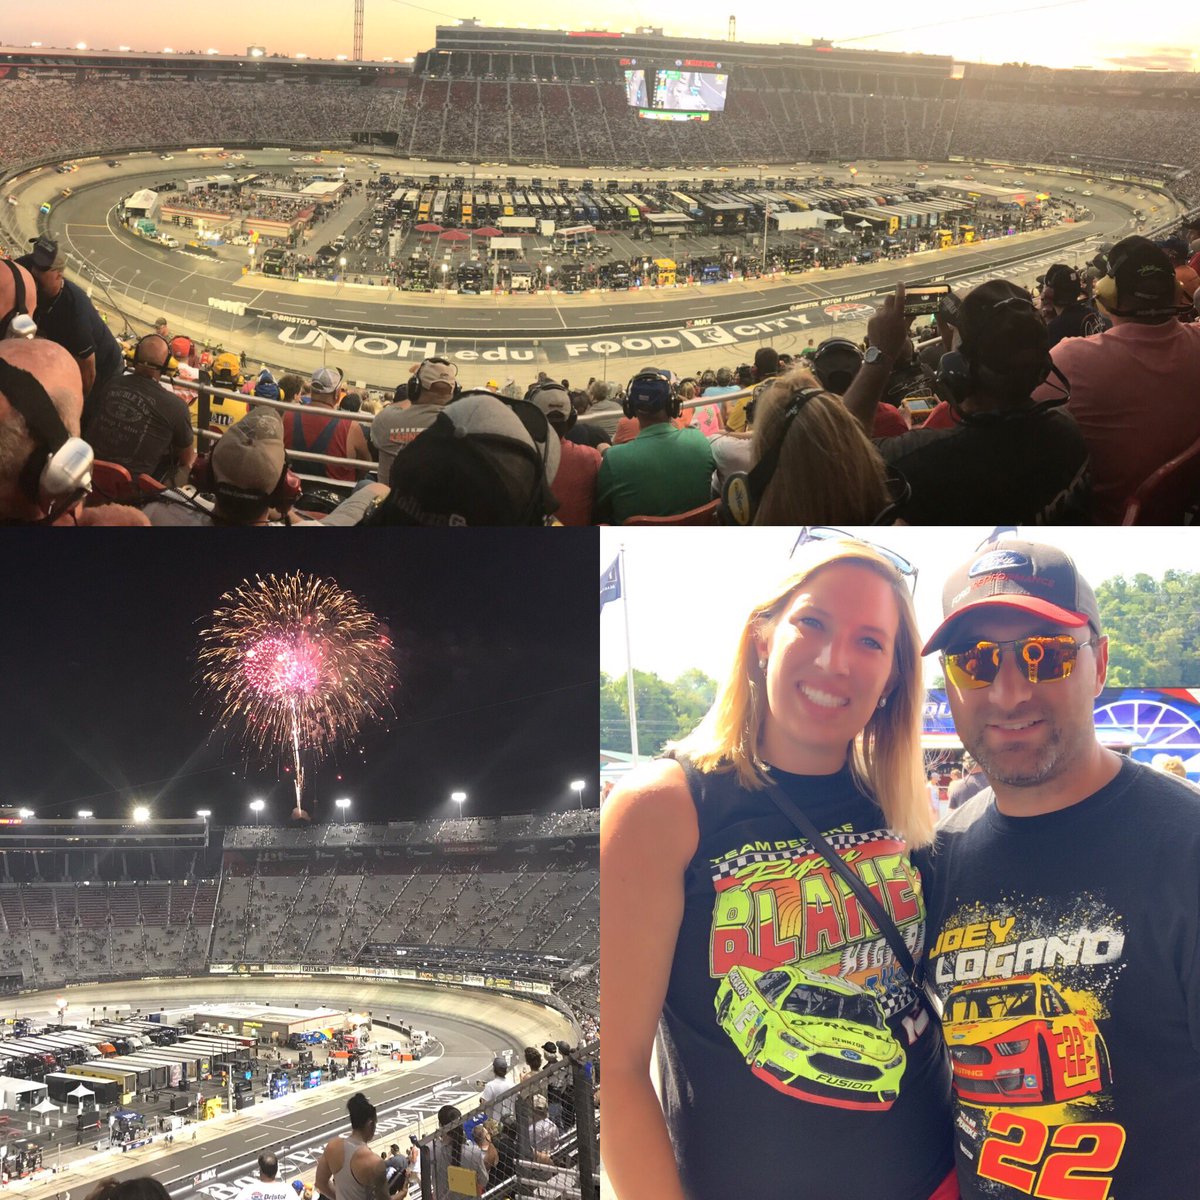 Had such a great vacation touring NASCAR shops, museums, and going to the night race at Bristol! What a race and track!#NASCAR #BristolMotorSpeedway #BristolNightRace https://t.co/3SjmV3SNkA